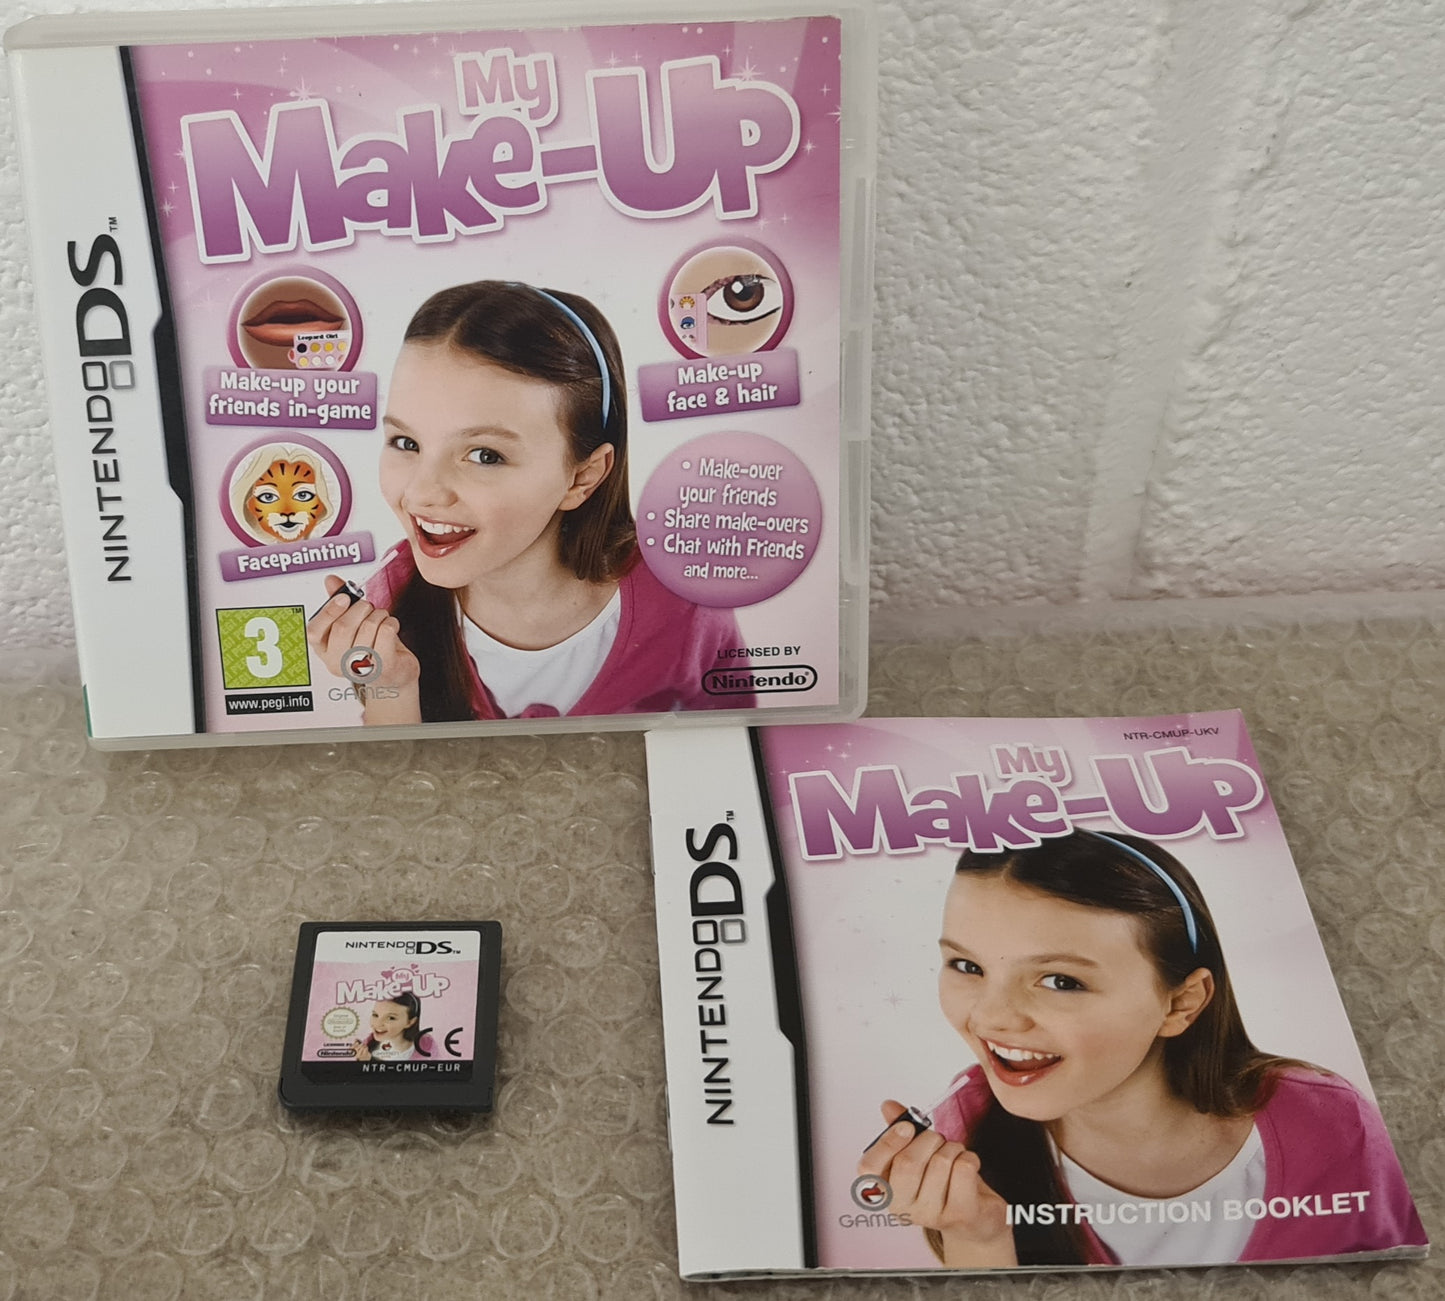 My Make-Up Nintendo DS Game